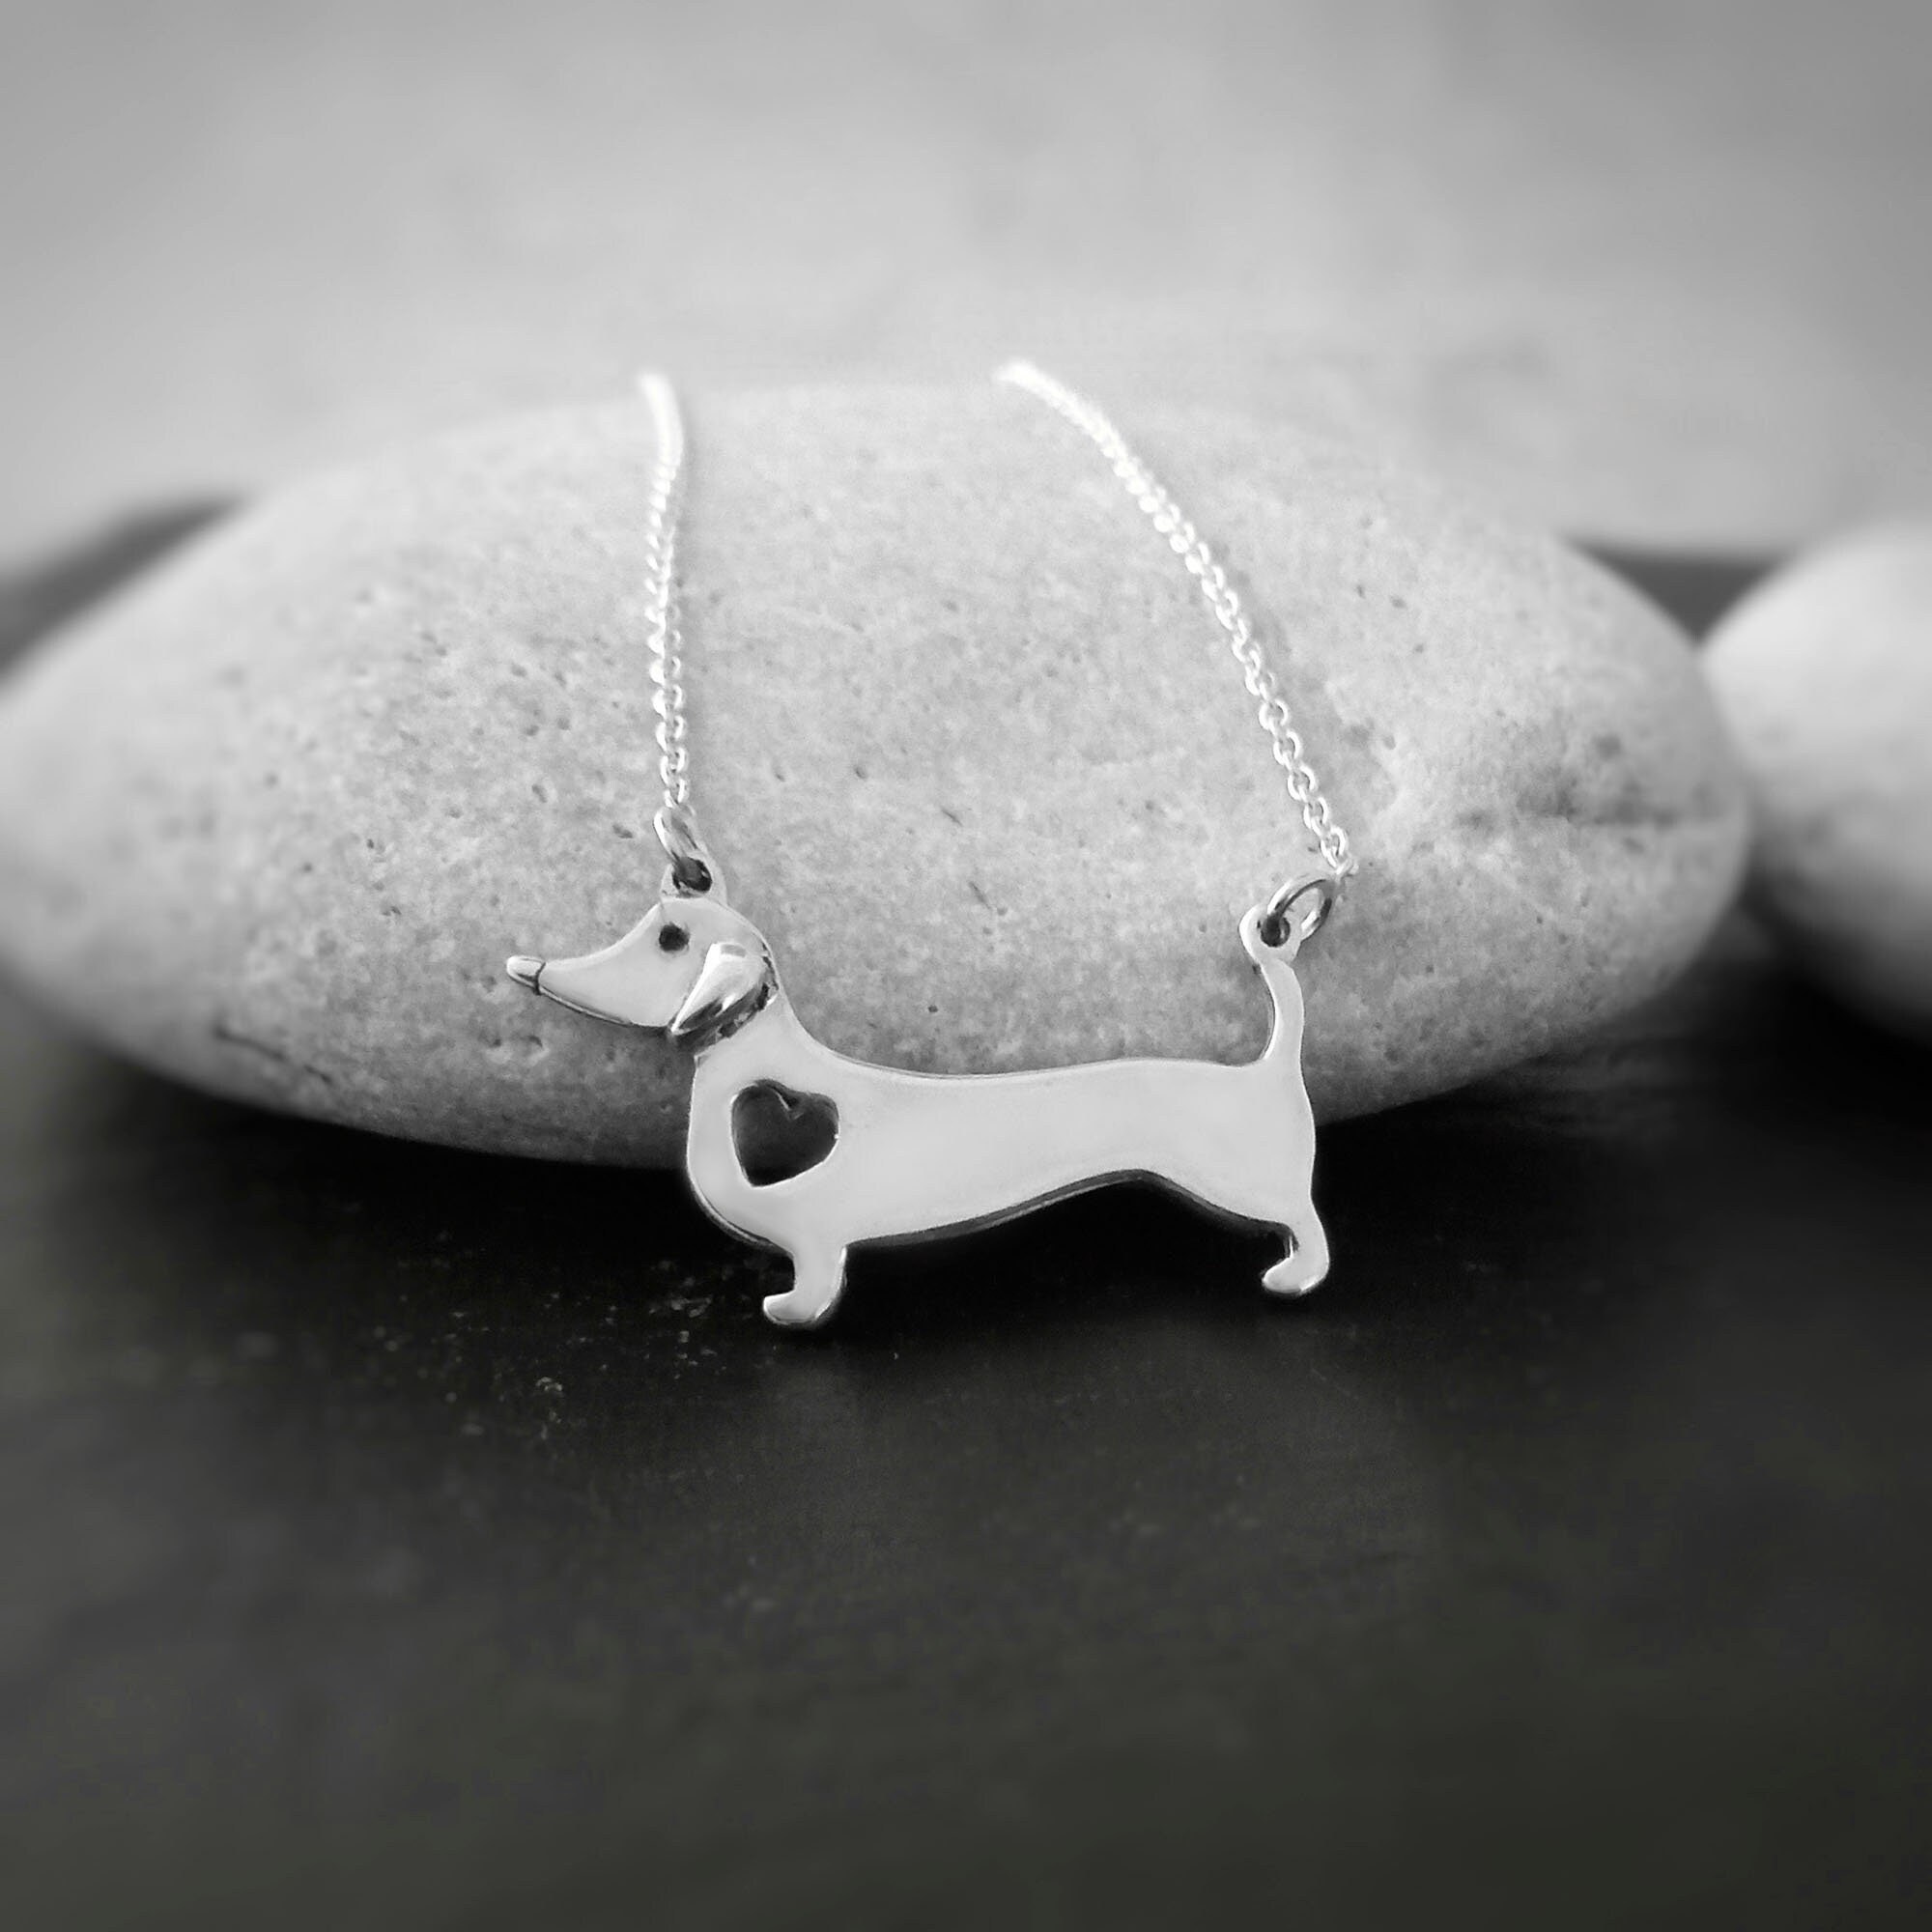 Dachshund Sausage Dog Necklace in Sterling Silver, Dachshunds With